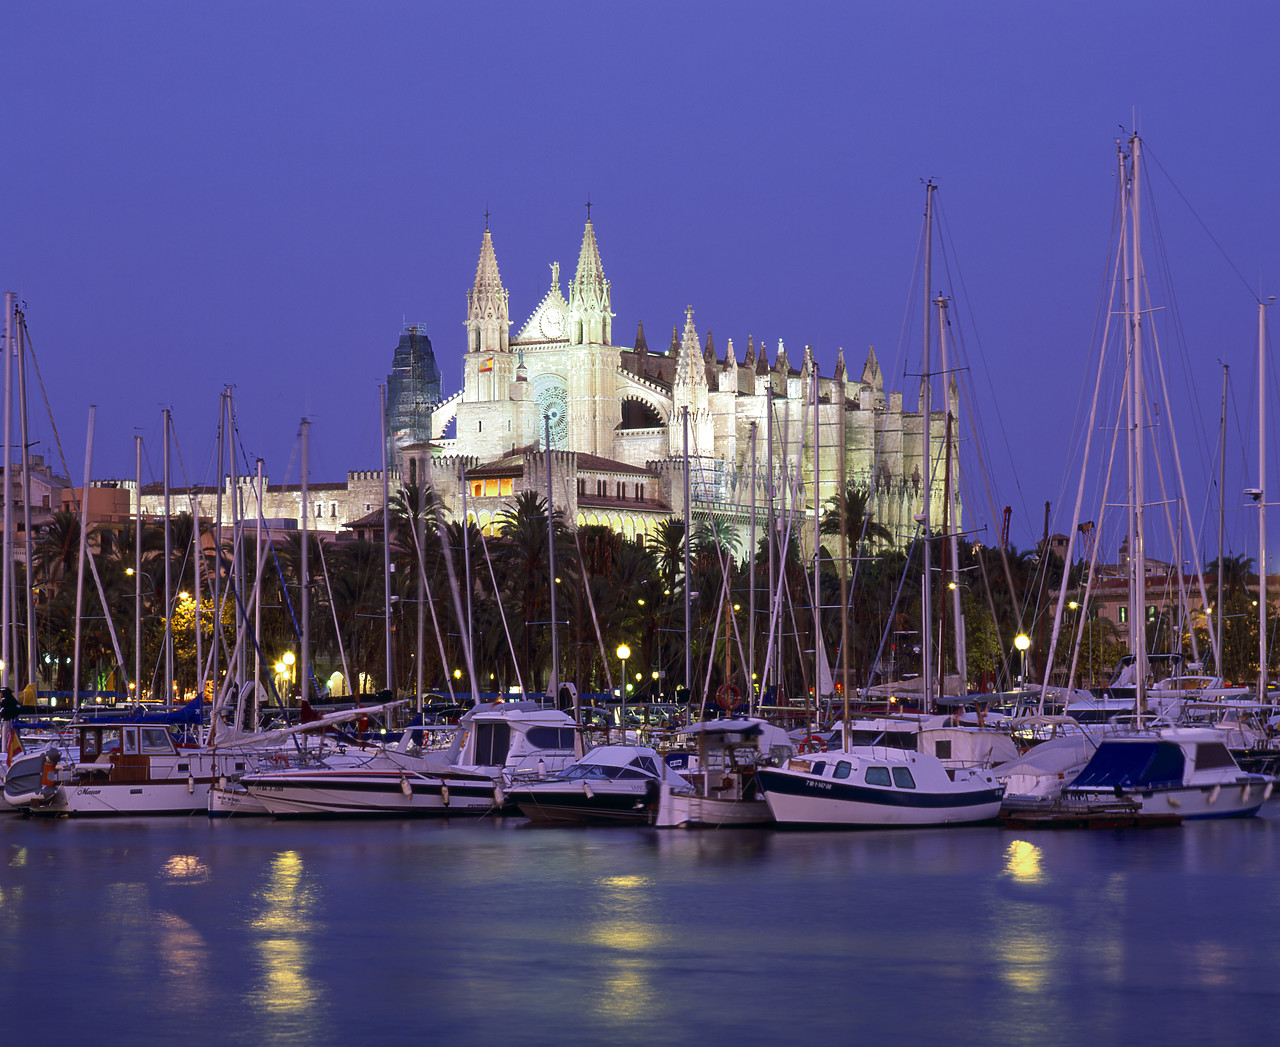 #050278-1 - Palma Cathedral at Night from Harbour, Palma, Mallorca, Spain